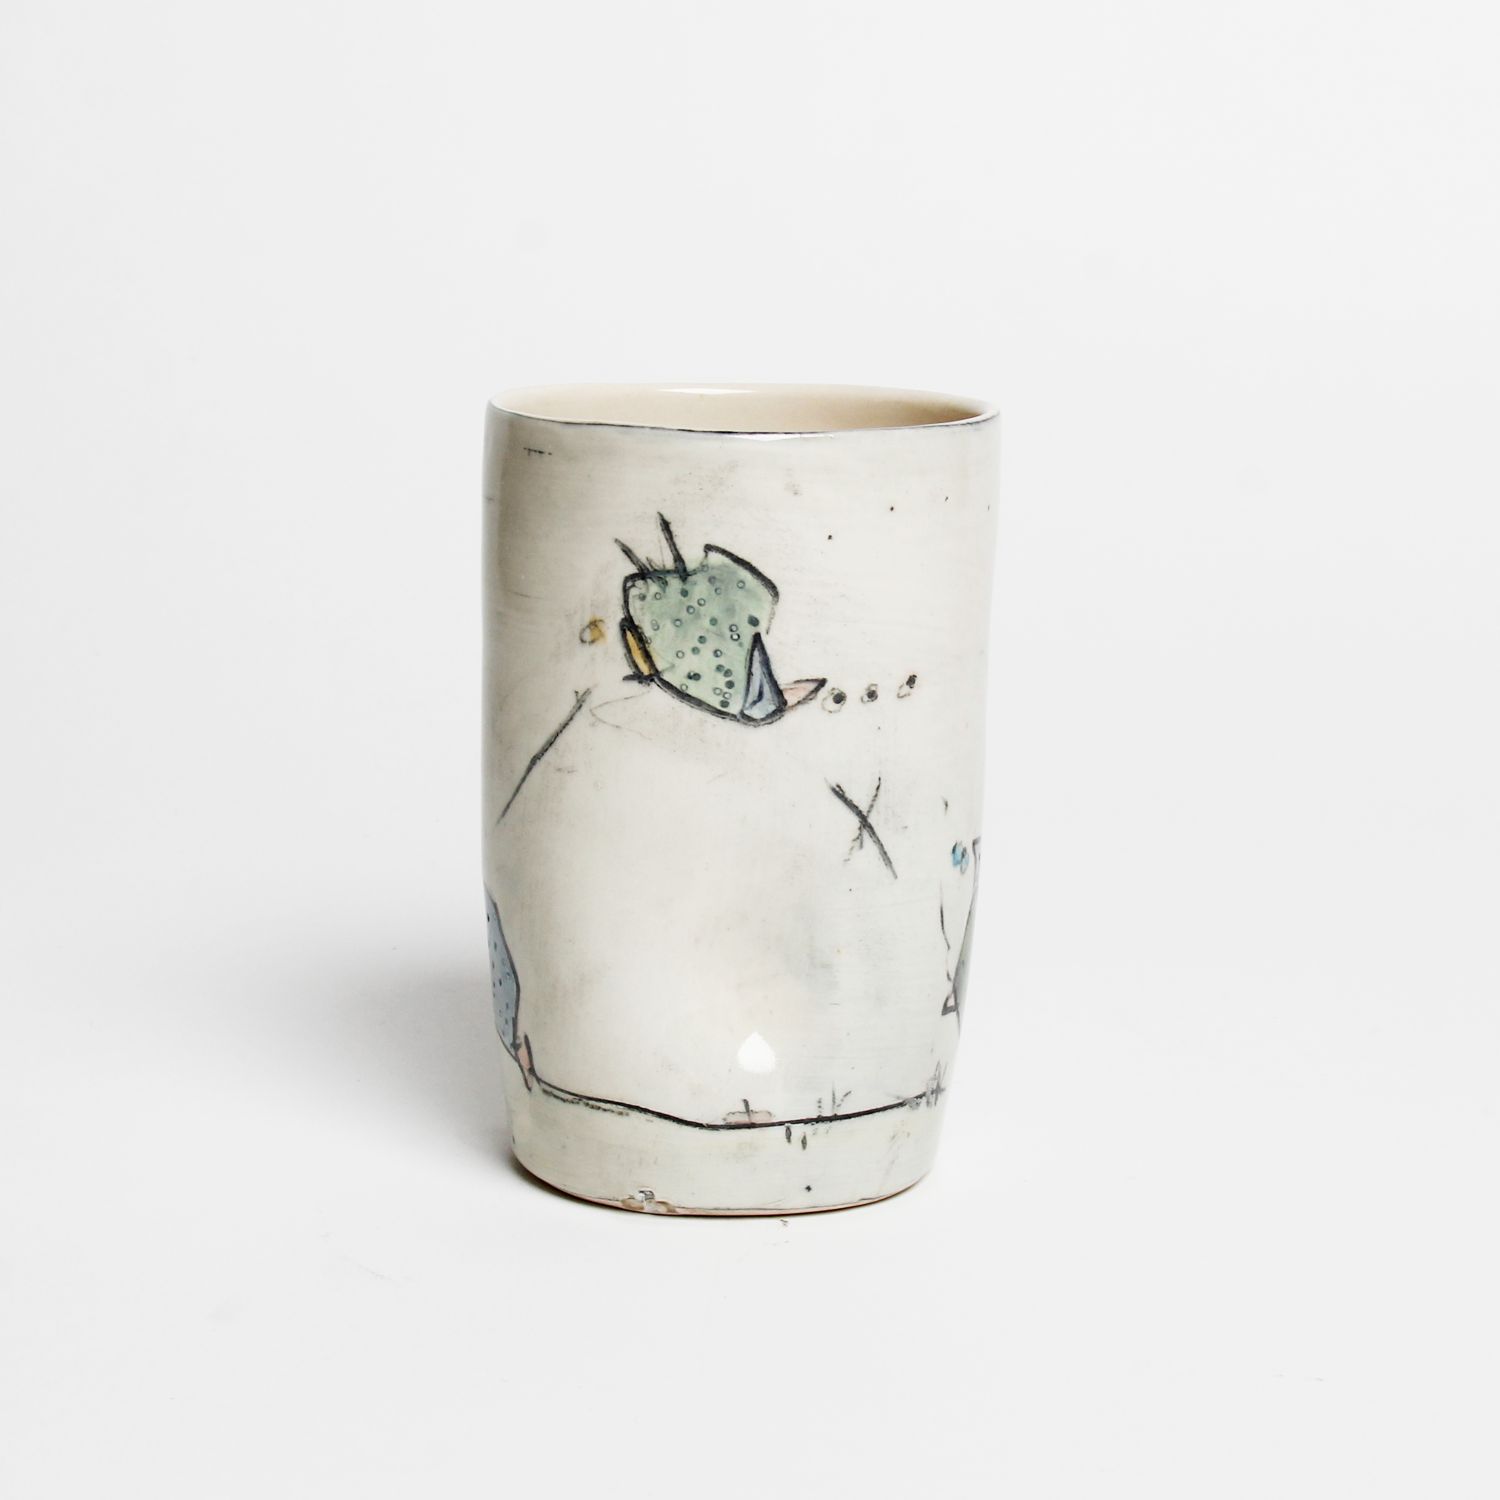 Stephen Hawes: Tall Cup Product Image 2 of 4